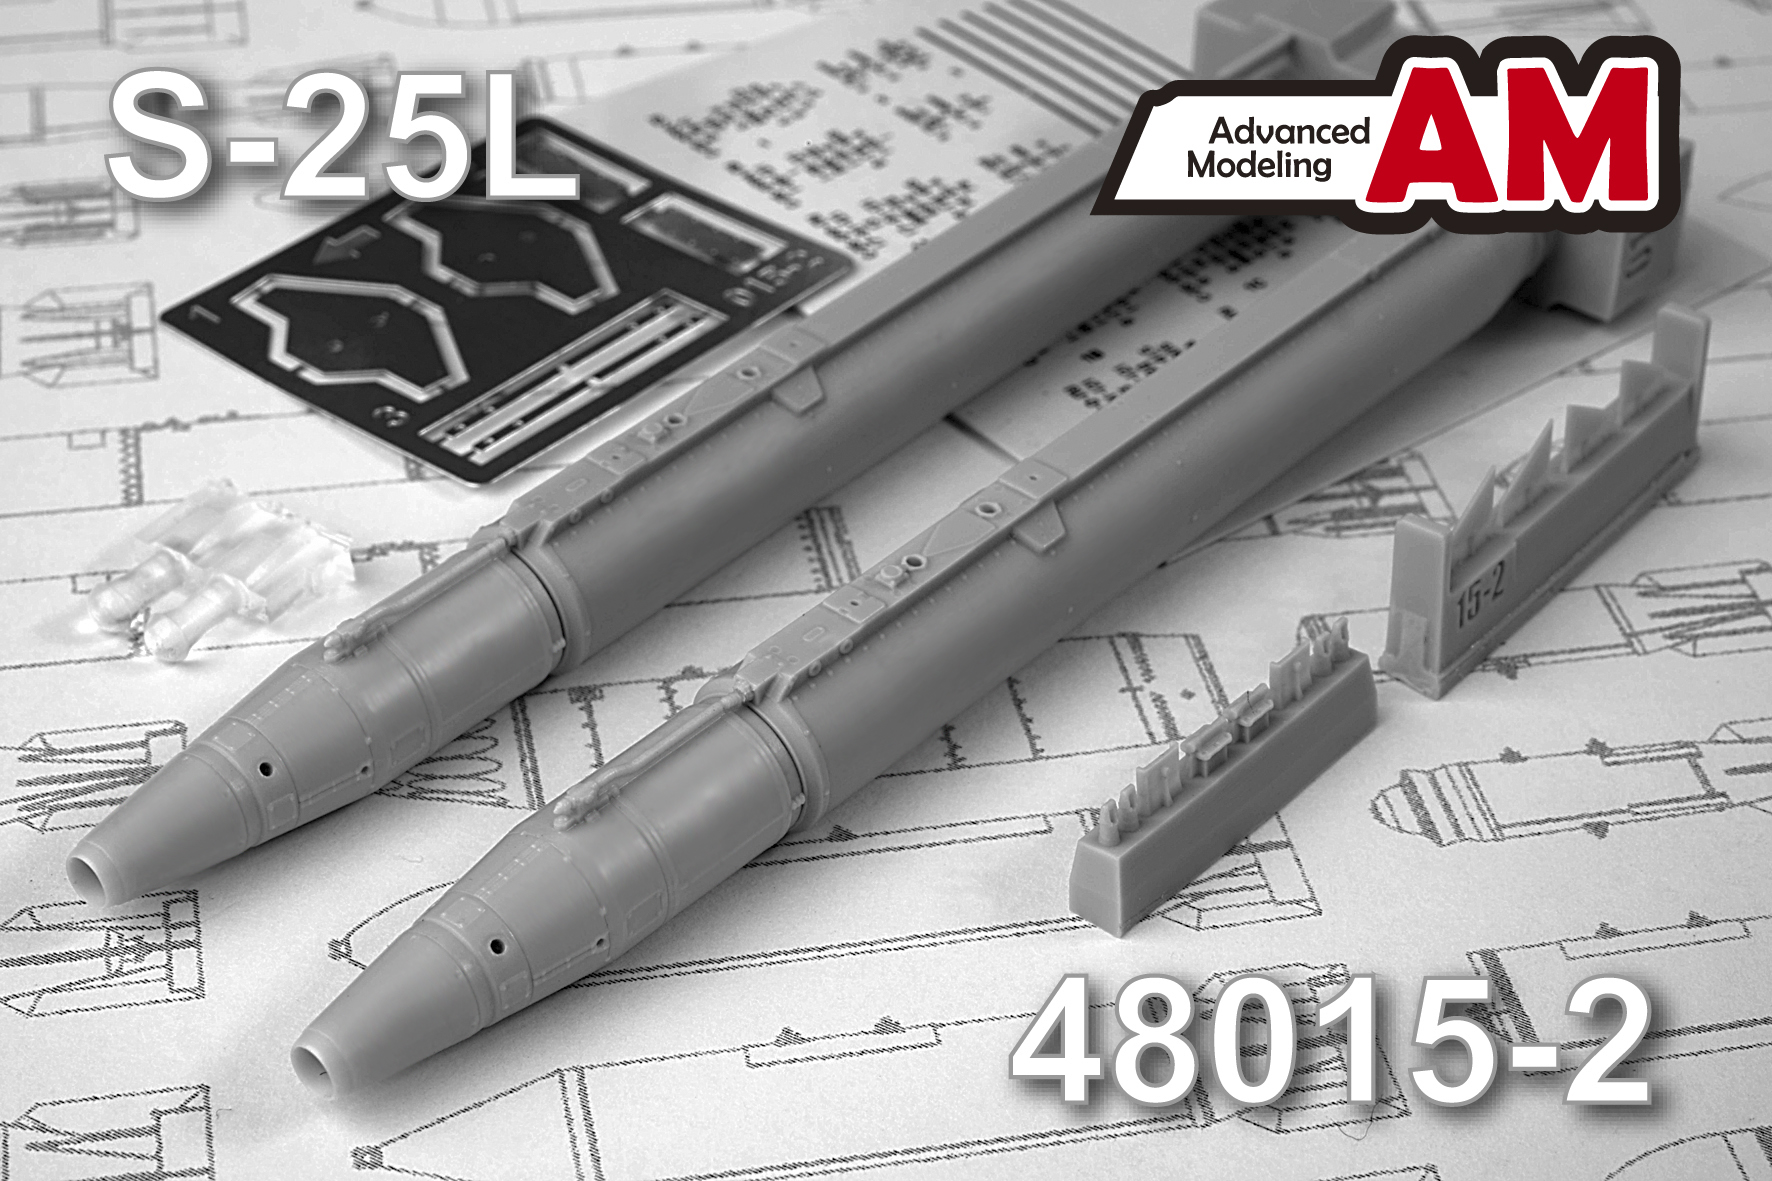 Additions (3D resin printing) 1/48 S-25L Air to Surface Missiles w/Laser HH (2 missiles w/O-25L launchers) (Advanced Modeling) 